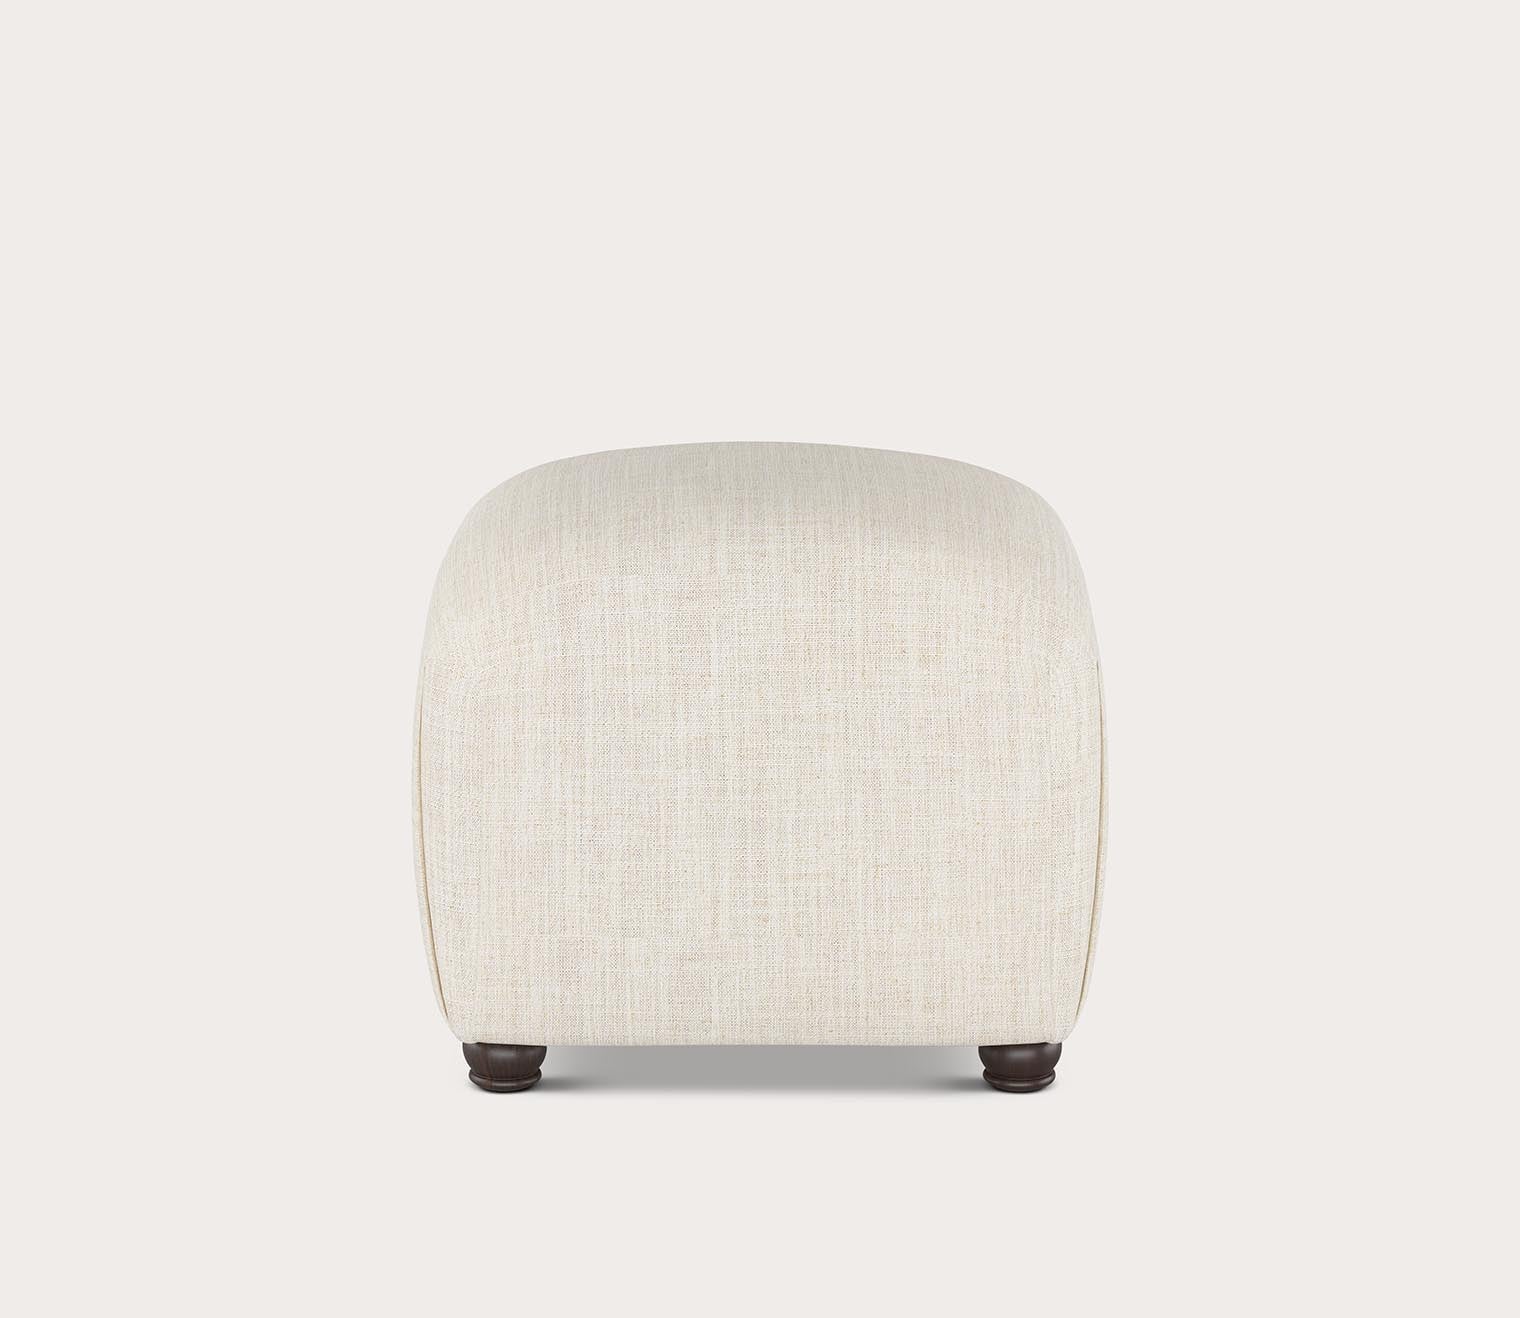 Half Circle Upholstered Ottoman by Skyline Furniture